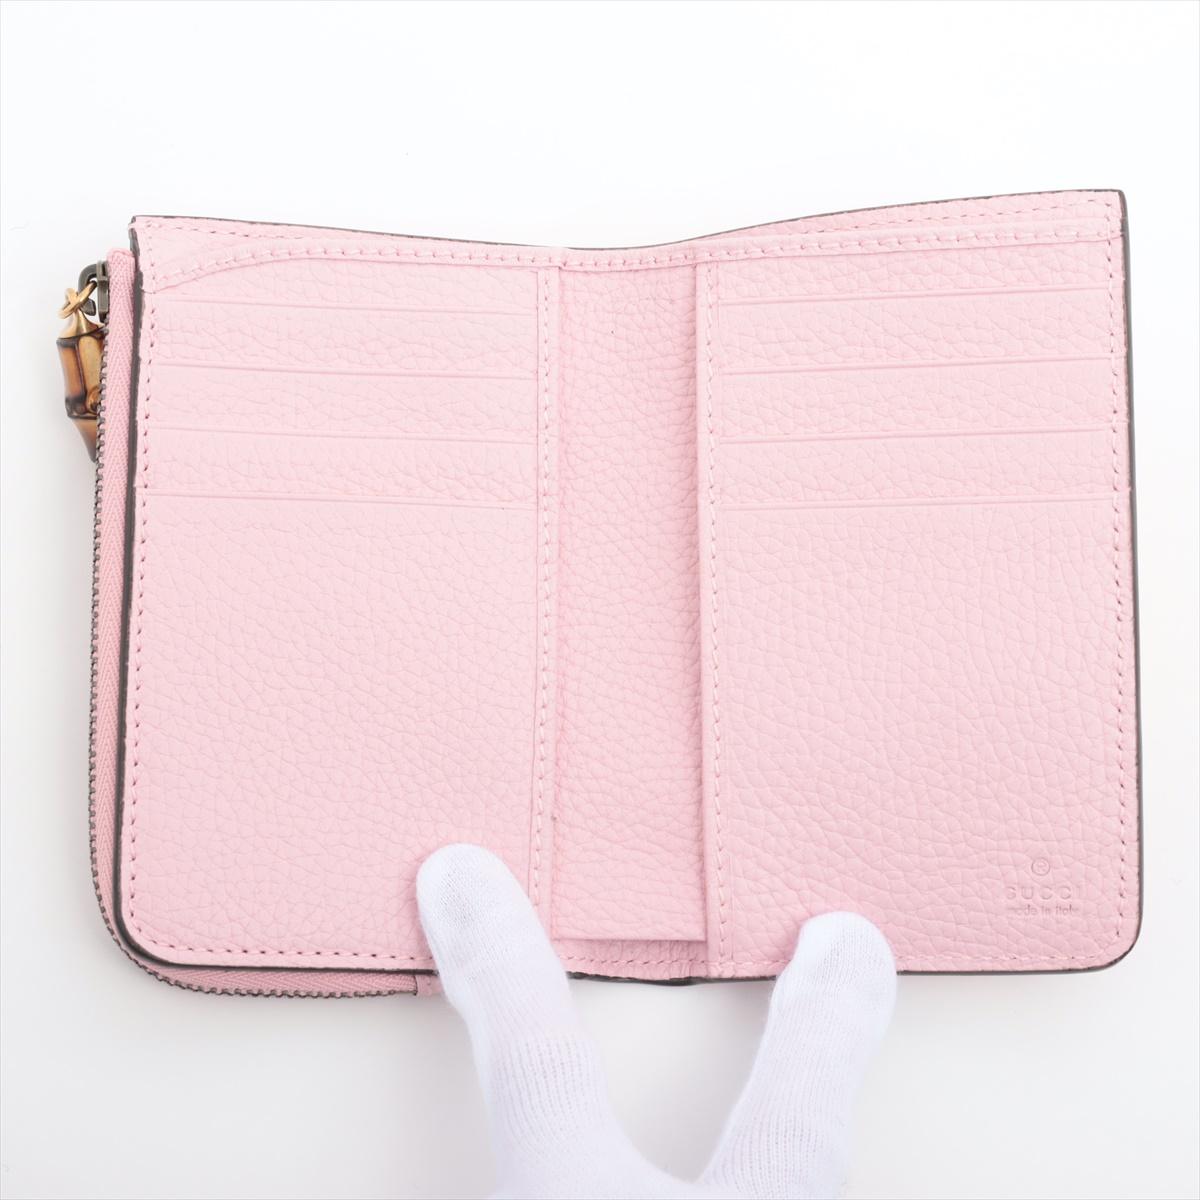 Women's Gucci Bamboo Double G Leather Bi-fold Wallet Pink For Sale